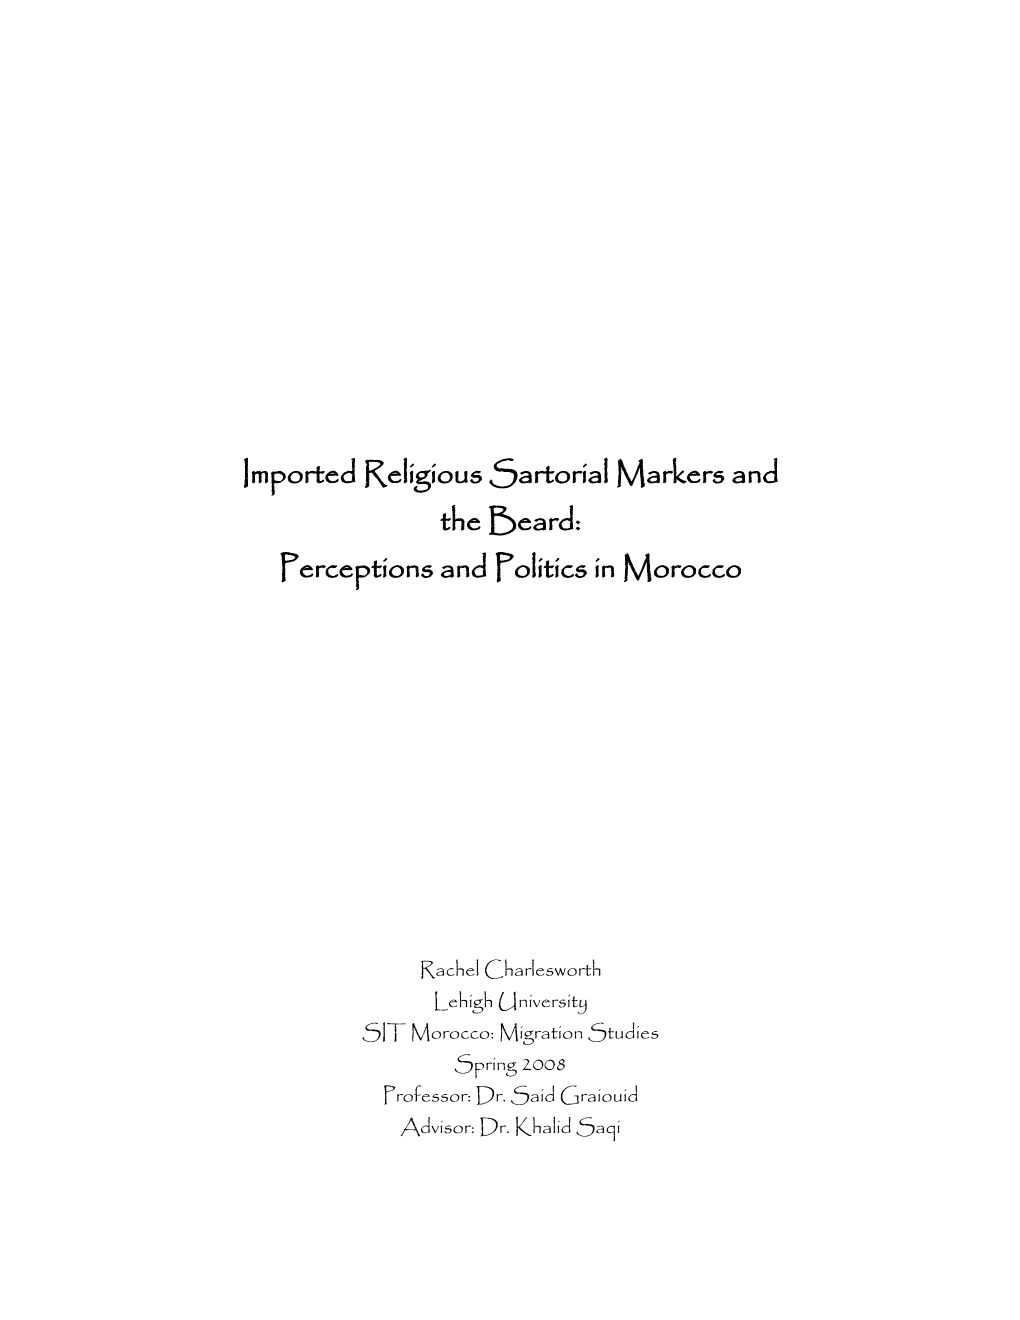 Imported Religious Sartorial Markers and the Beard: Perceptions and Politics in Morocco